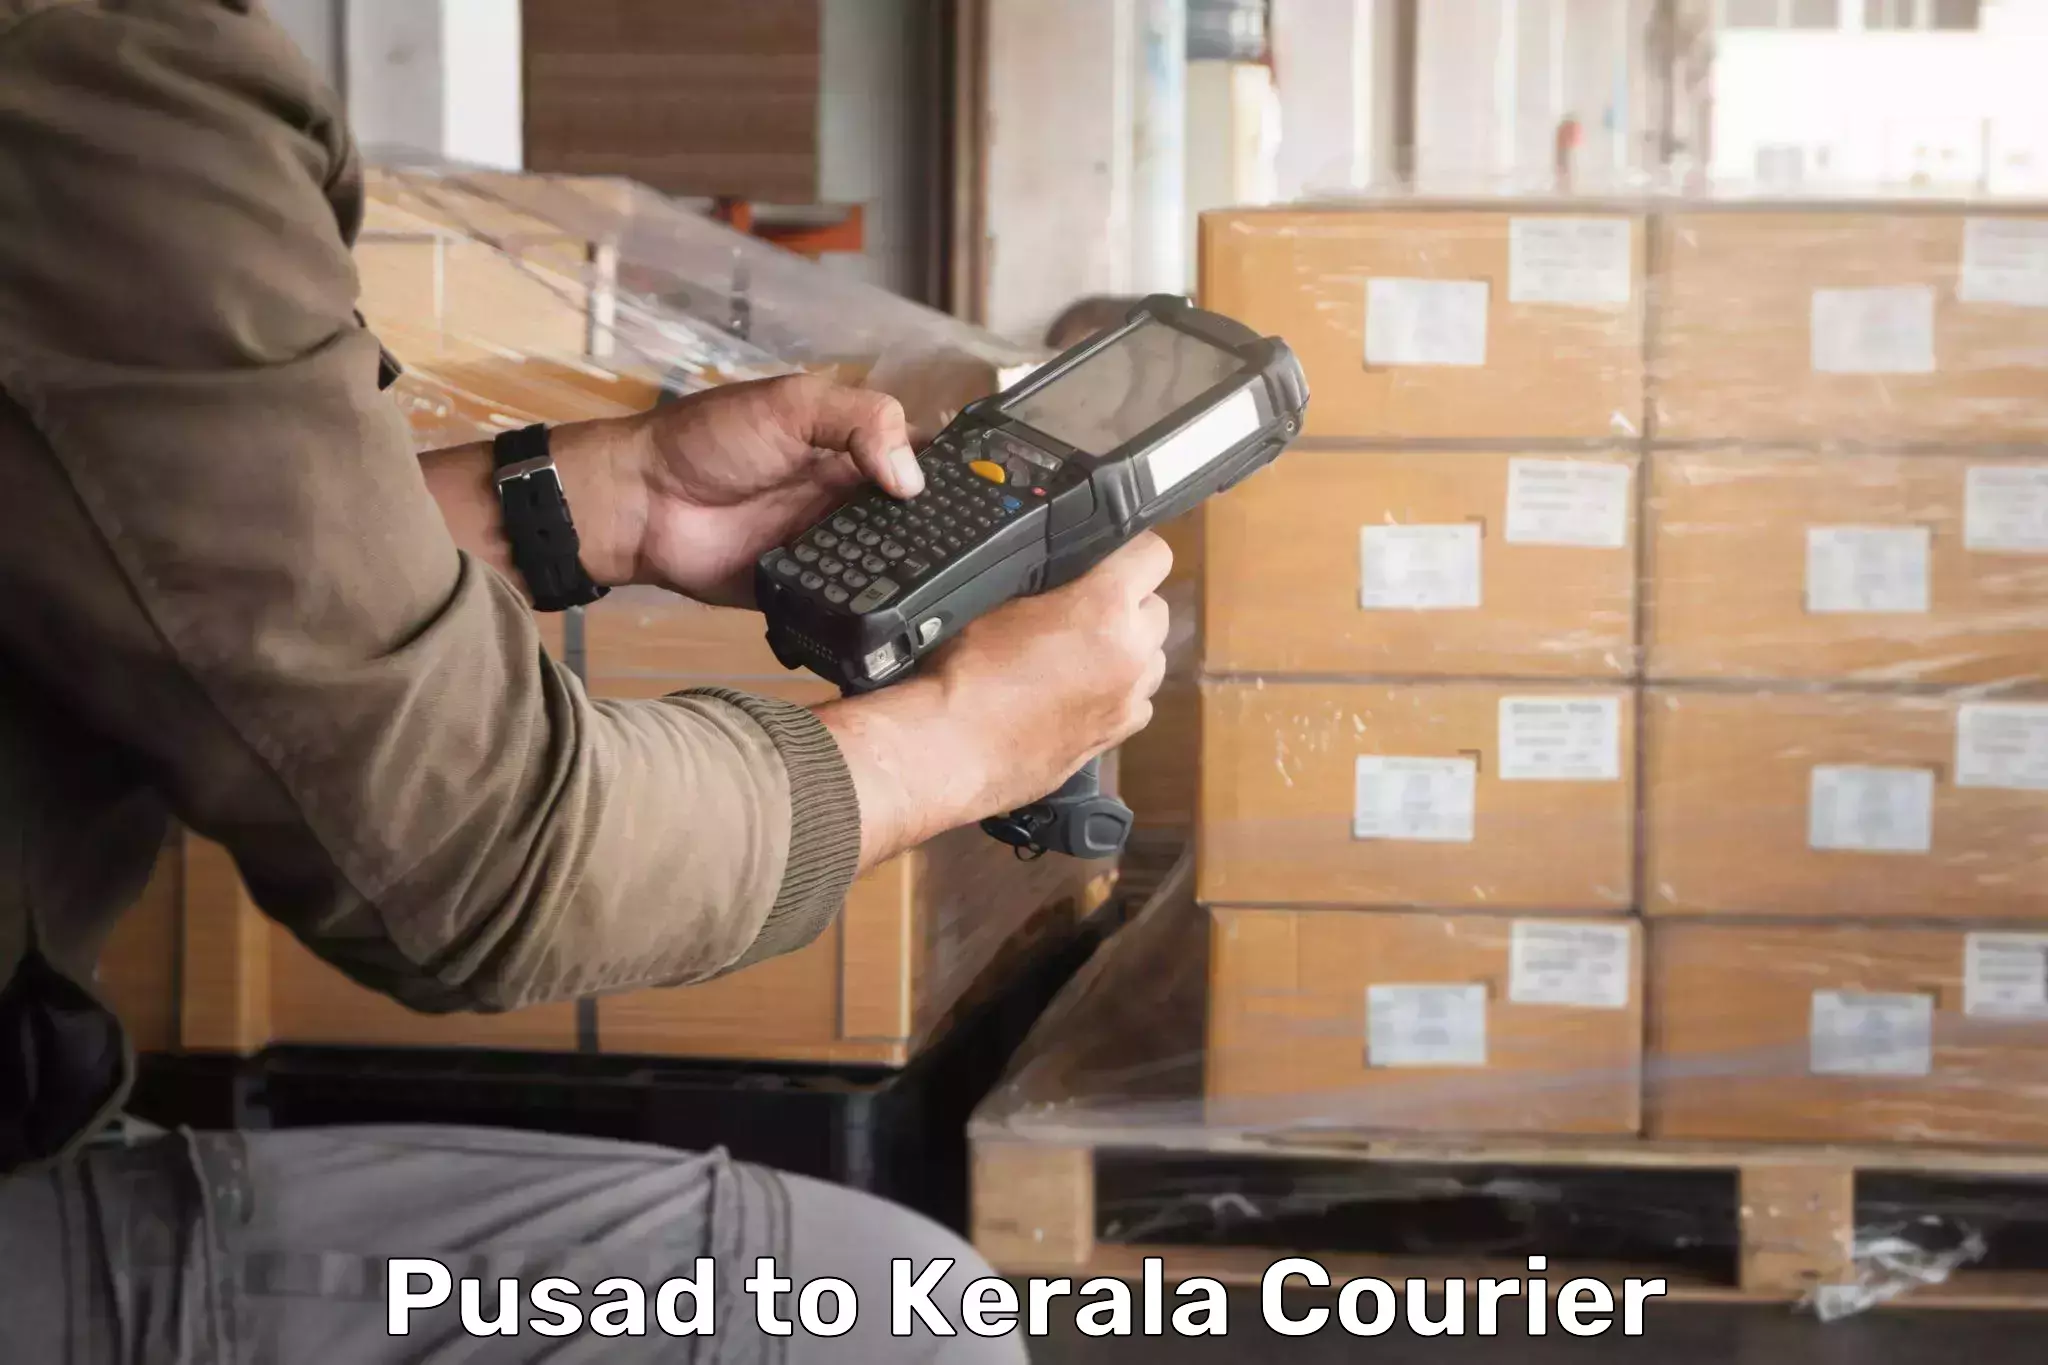 State-of-the-art courier technology Pusad to Kerala